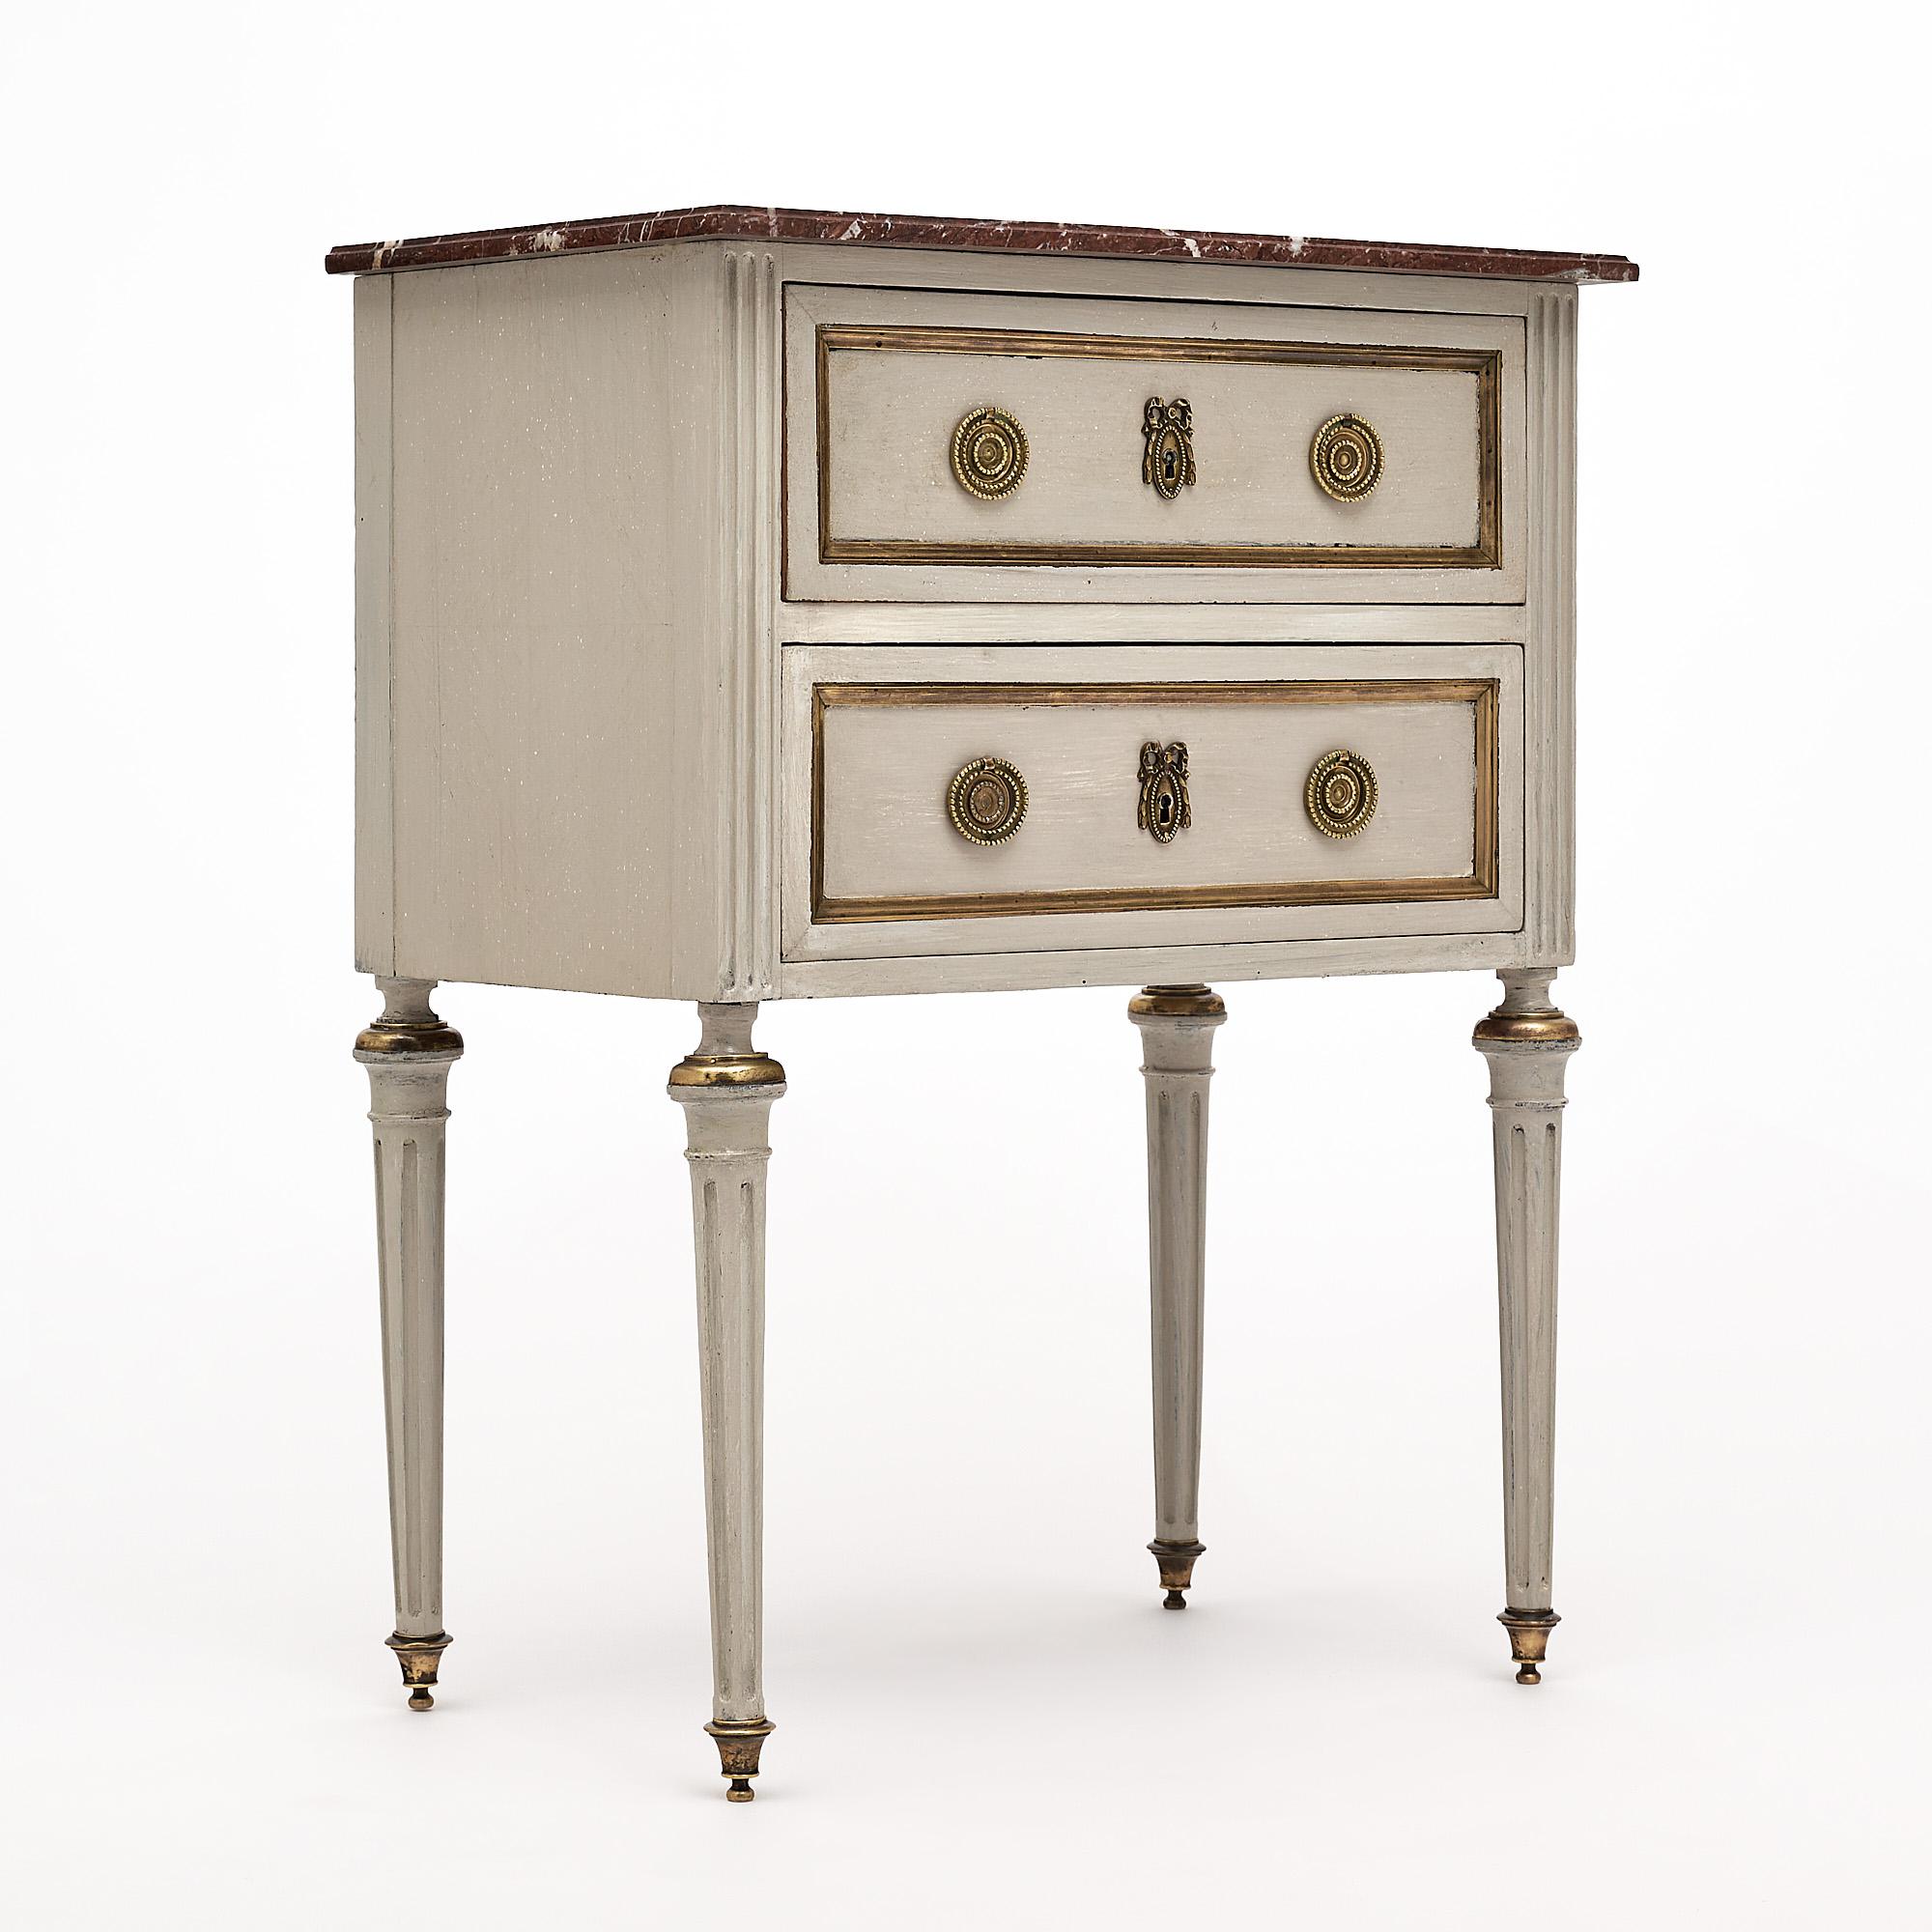 Side table, French, made of cherry wood with a “Trianon” gray paint finish. This piece has hand carved and fluted legs with finely cast hardware and trim throughout. There is a beautiful Rouge Royal marble top.